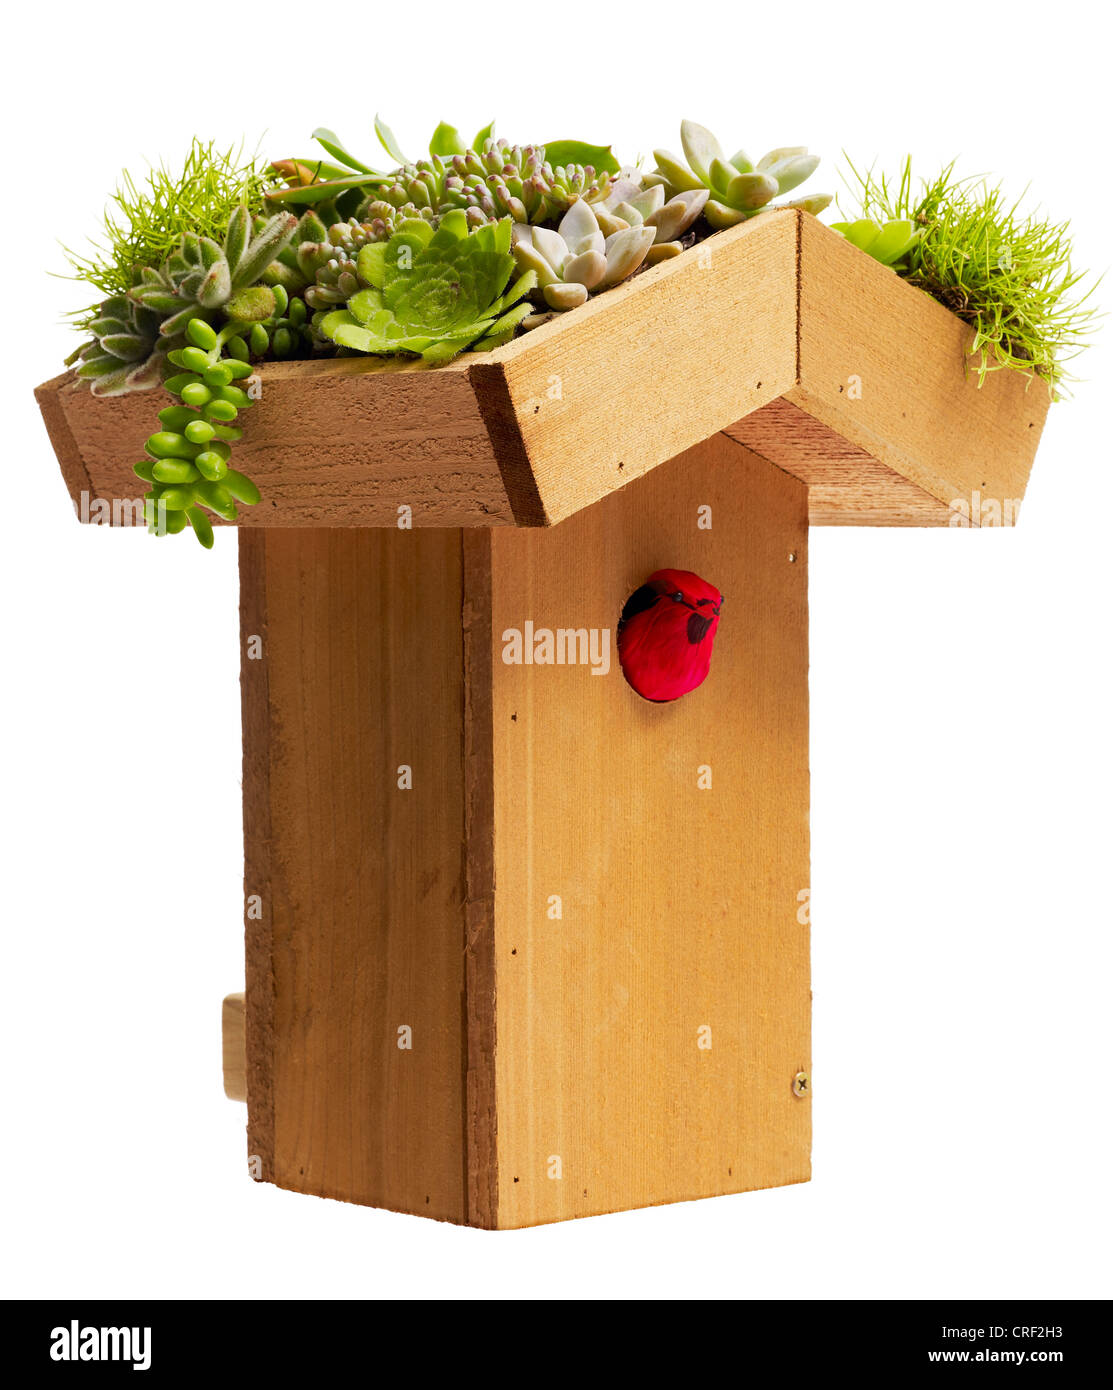 Birdhouse with living roof. Various succulents Stock Photo